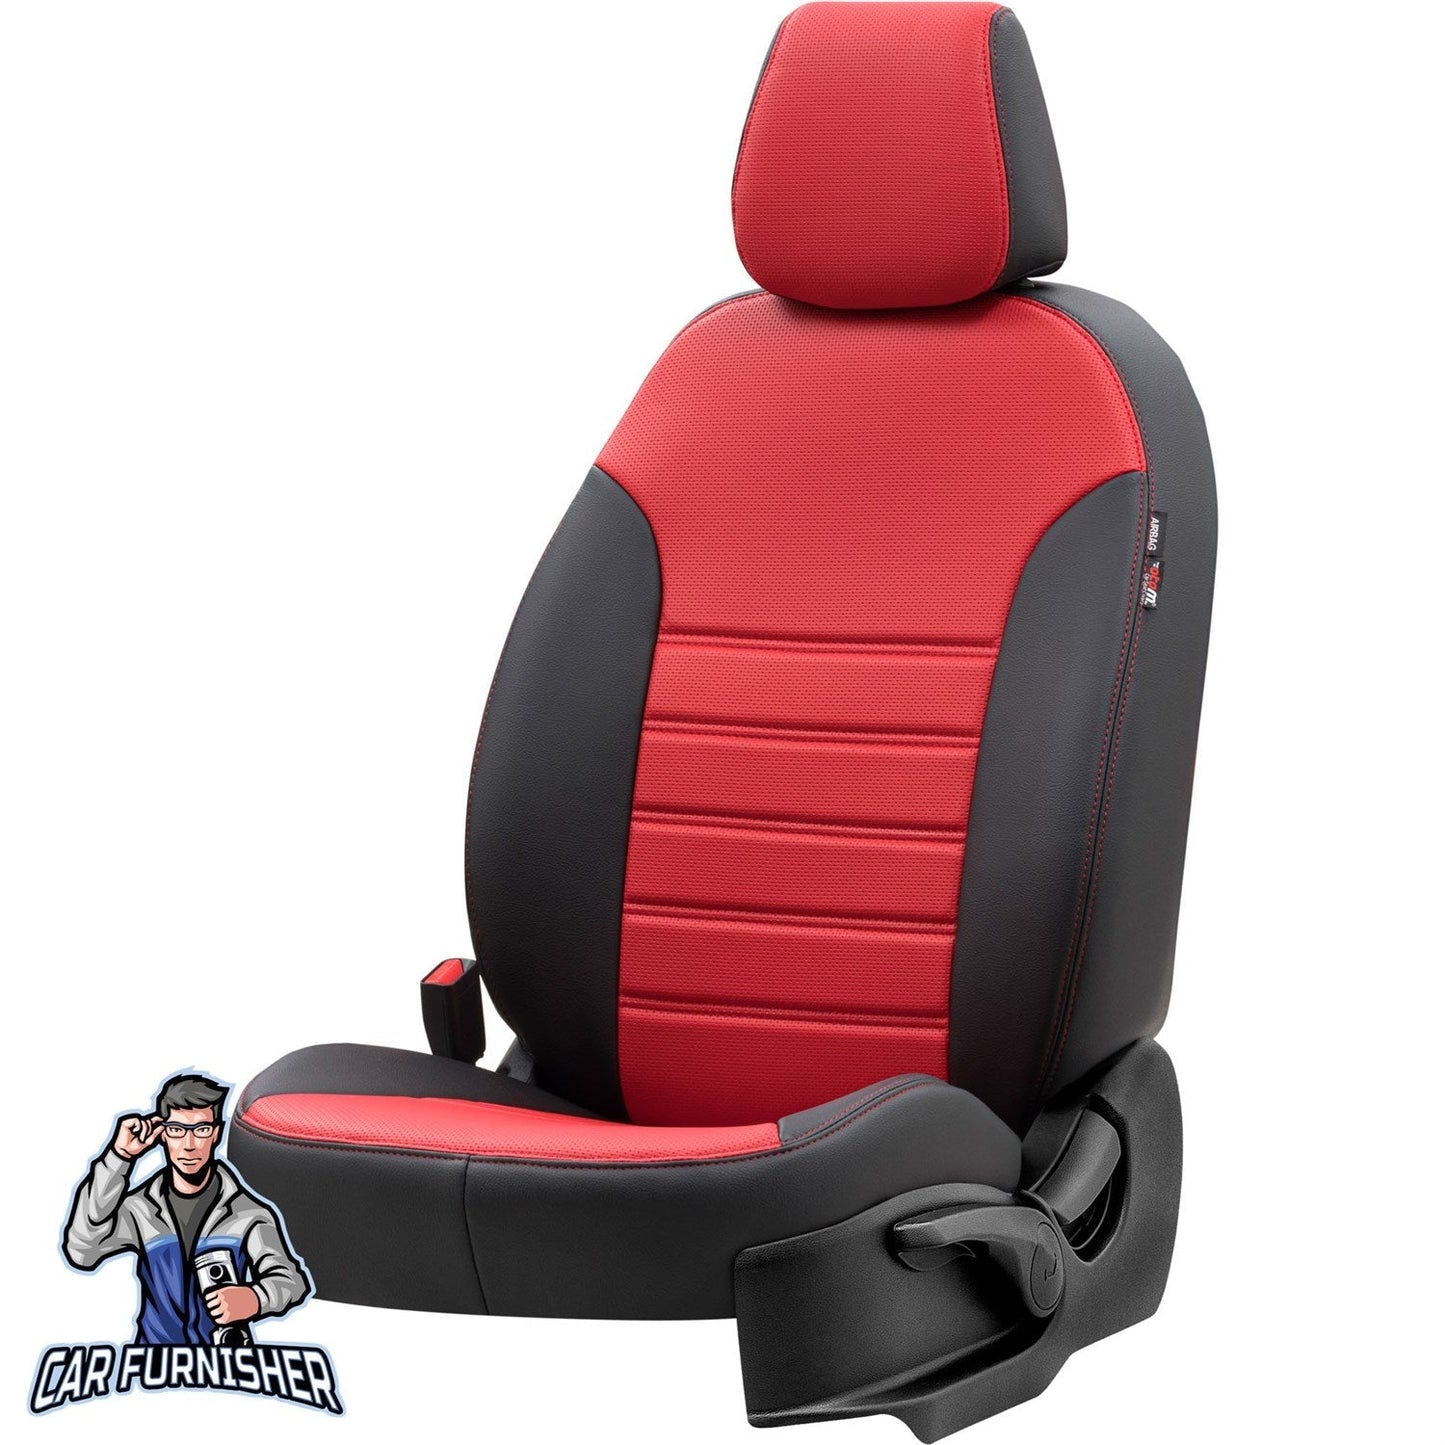 Fiat Doblo Seat Covers New York Leather Design Red Leather